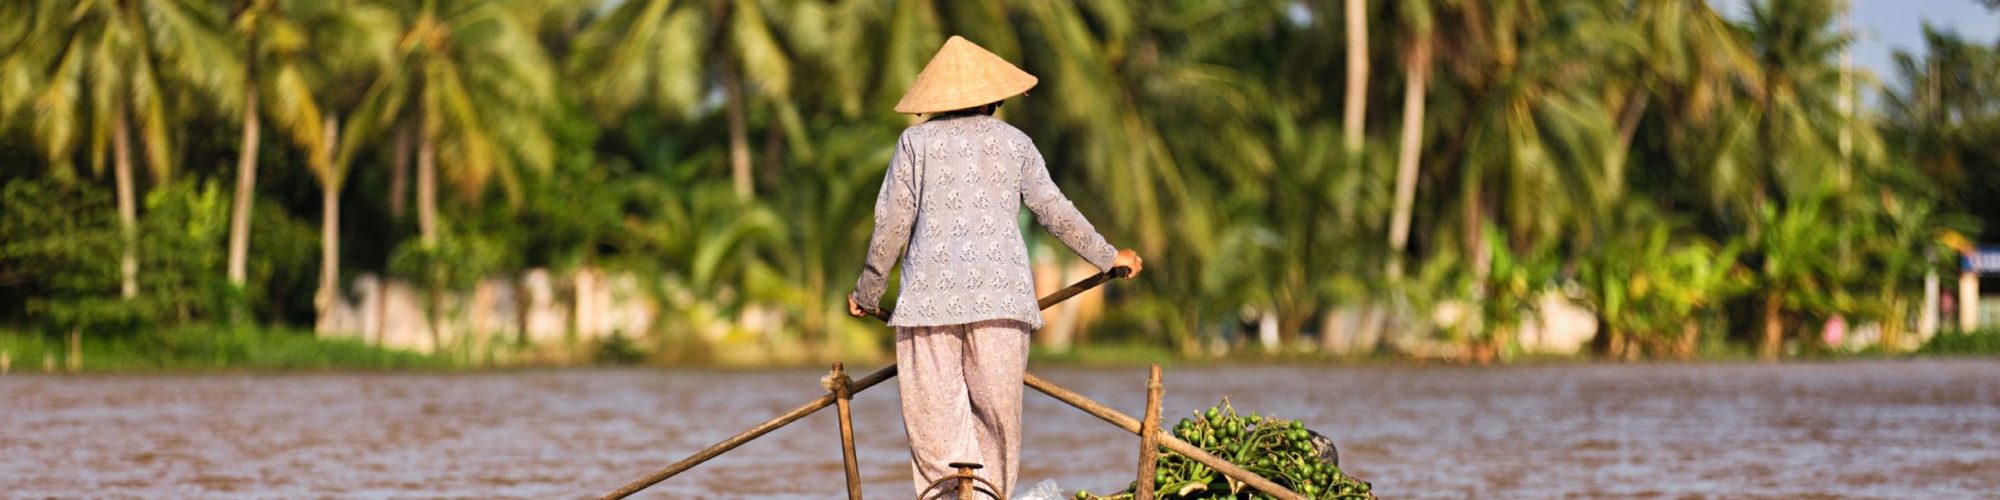 Mekong River travel agents packages deals